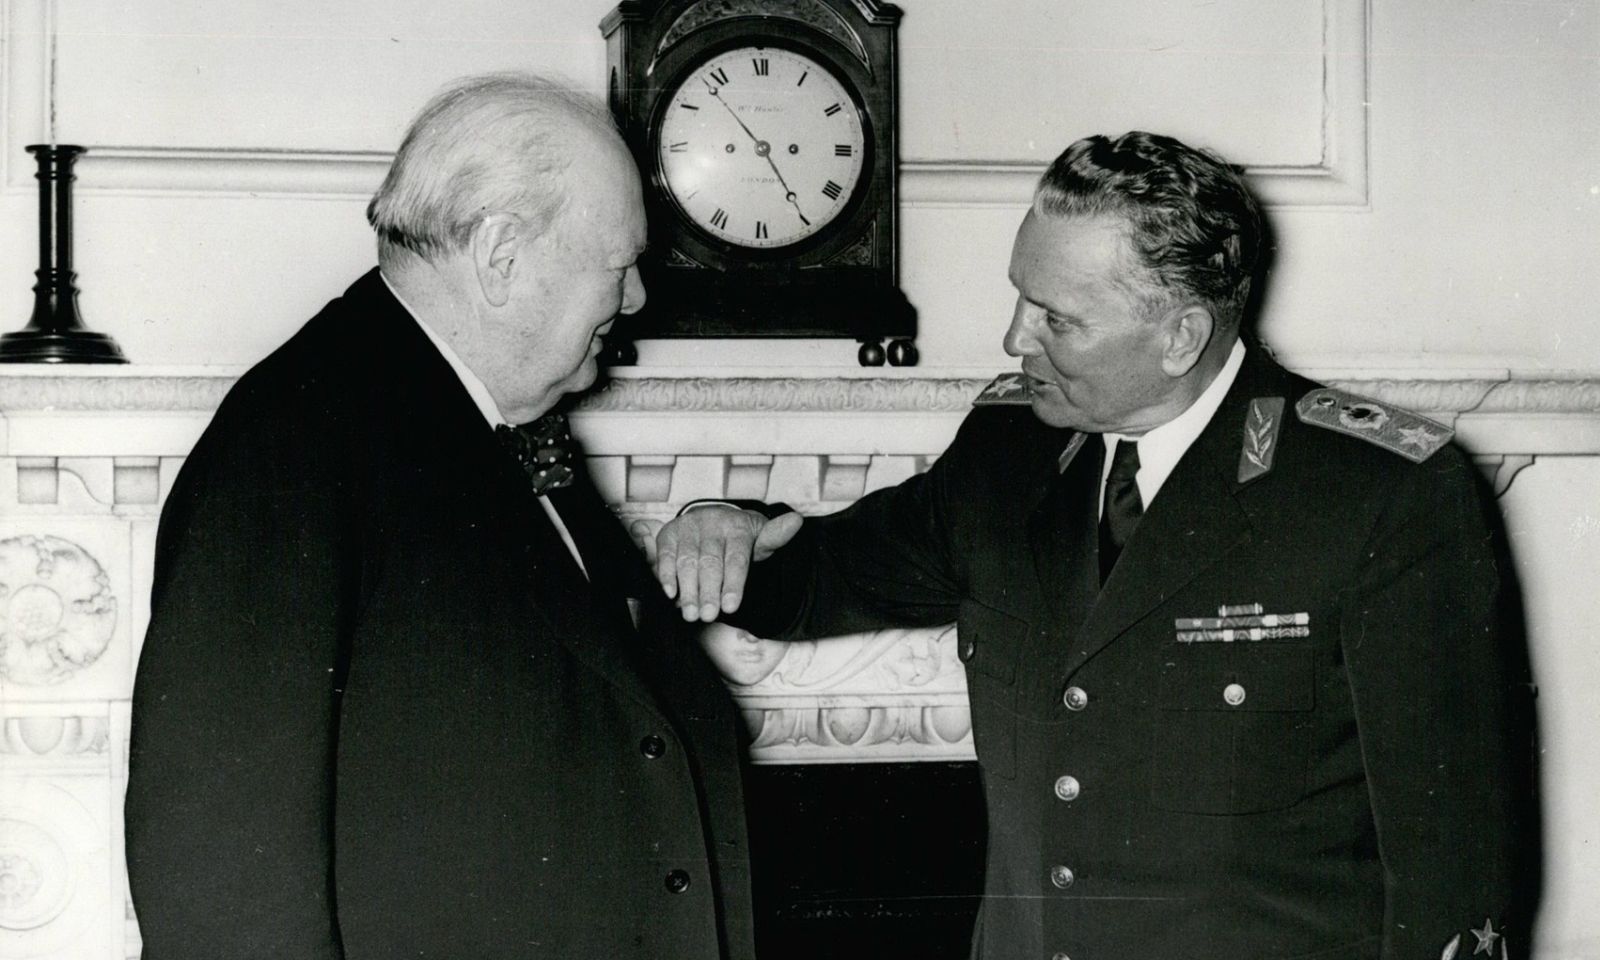 Mar. 03, 1953 - Marshal Tito In London...Visits No.10 Downing Street: Soon after his arrival in London, this afternoon, Marshal Tito paid a visit to the Prime Minister at No. 10 Downing Street. Photo Shows L to R: Mr. Winston Churchill with Marshall Tito, at No. 10 Downing Street.,Image: 209867204, License: Rights-managed, Restrictions: , Model Release: no, Credit line: Keystone Pictures USA / Zuma Press / Profimedia